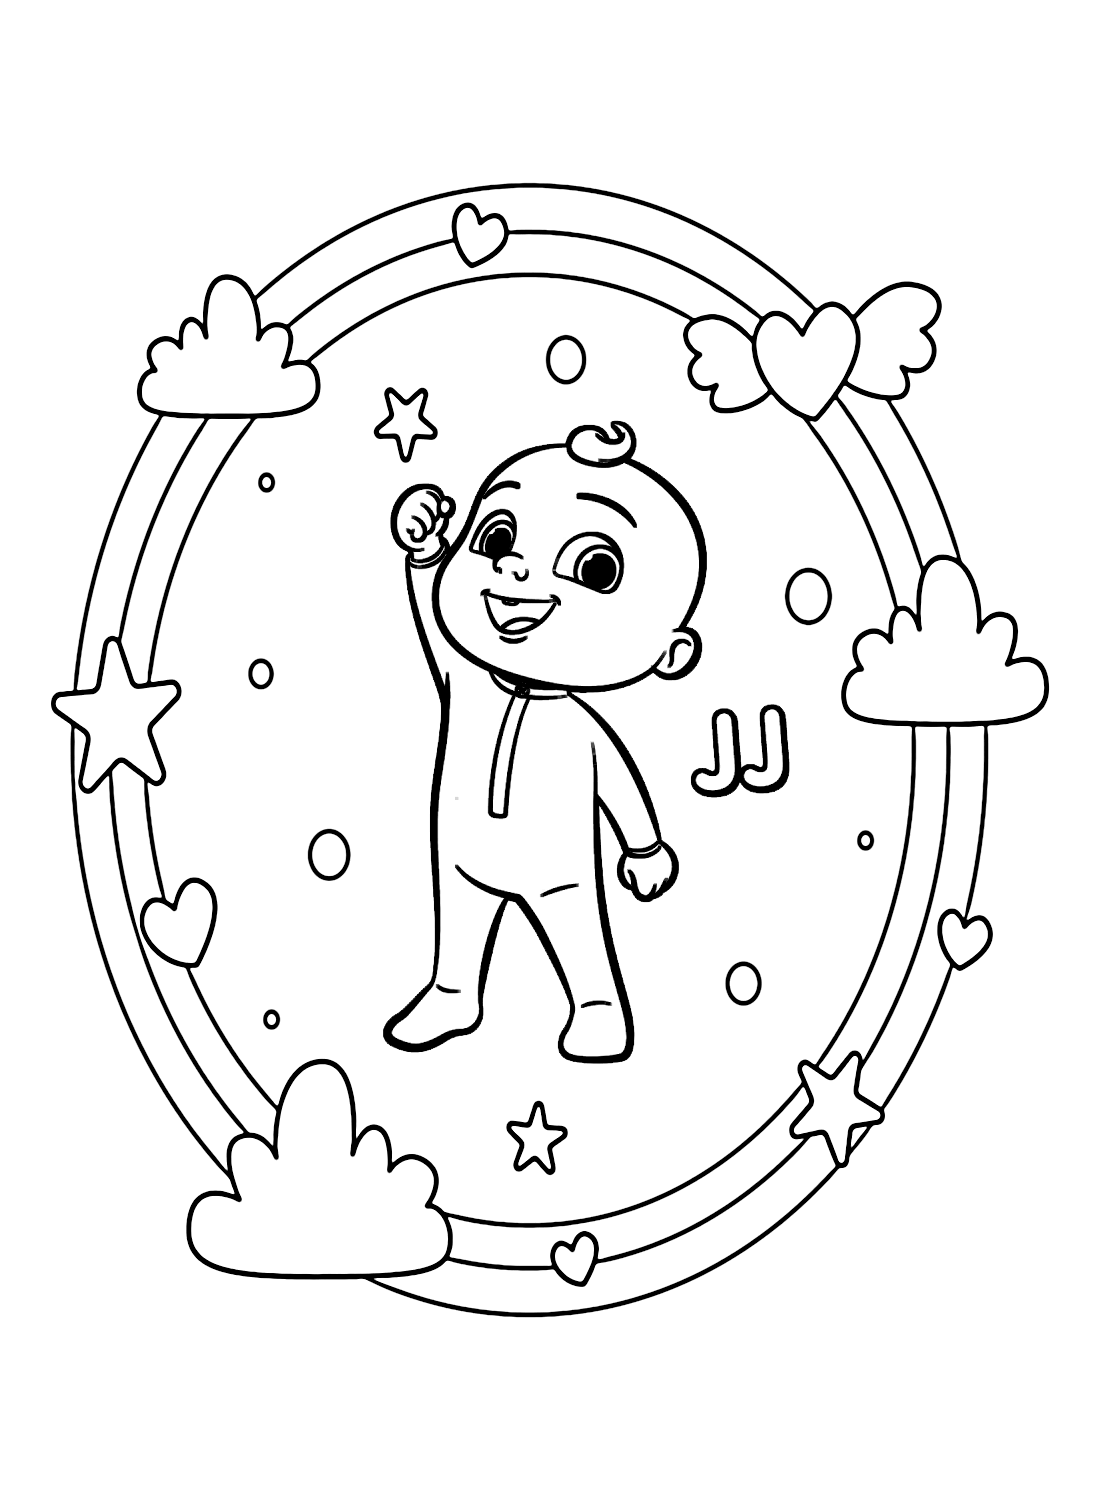 Cocomelon Coloring Pages to Print from Cocomelon